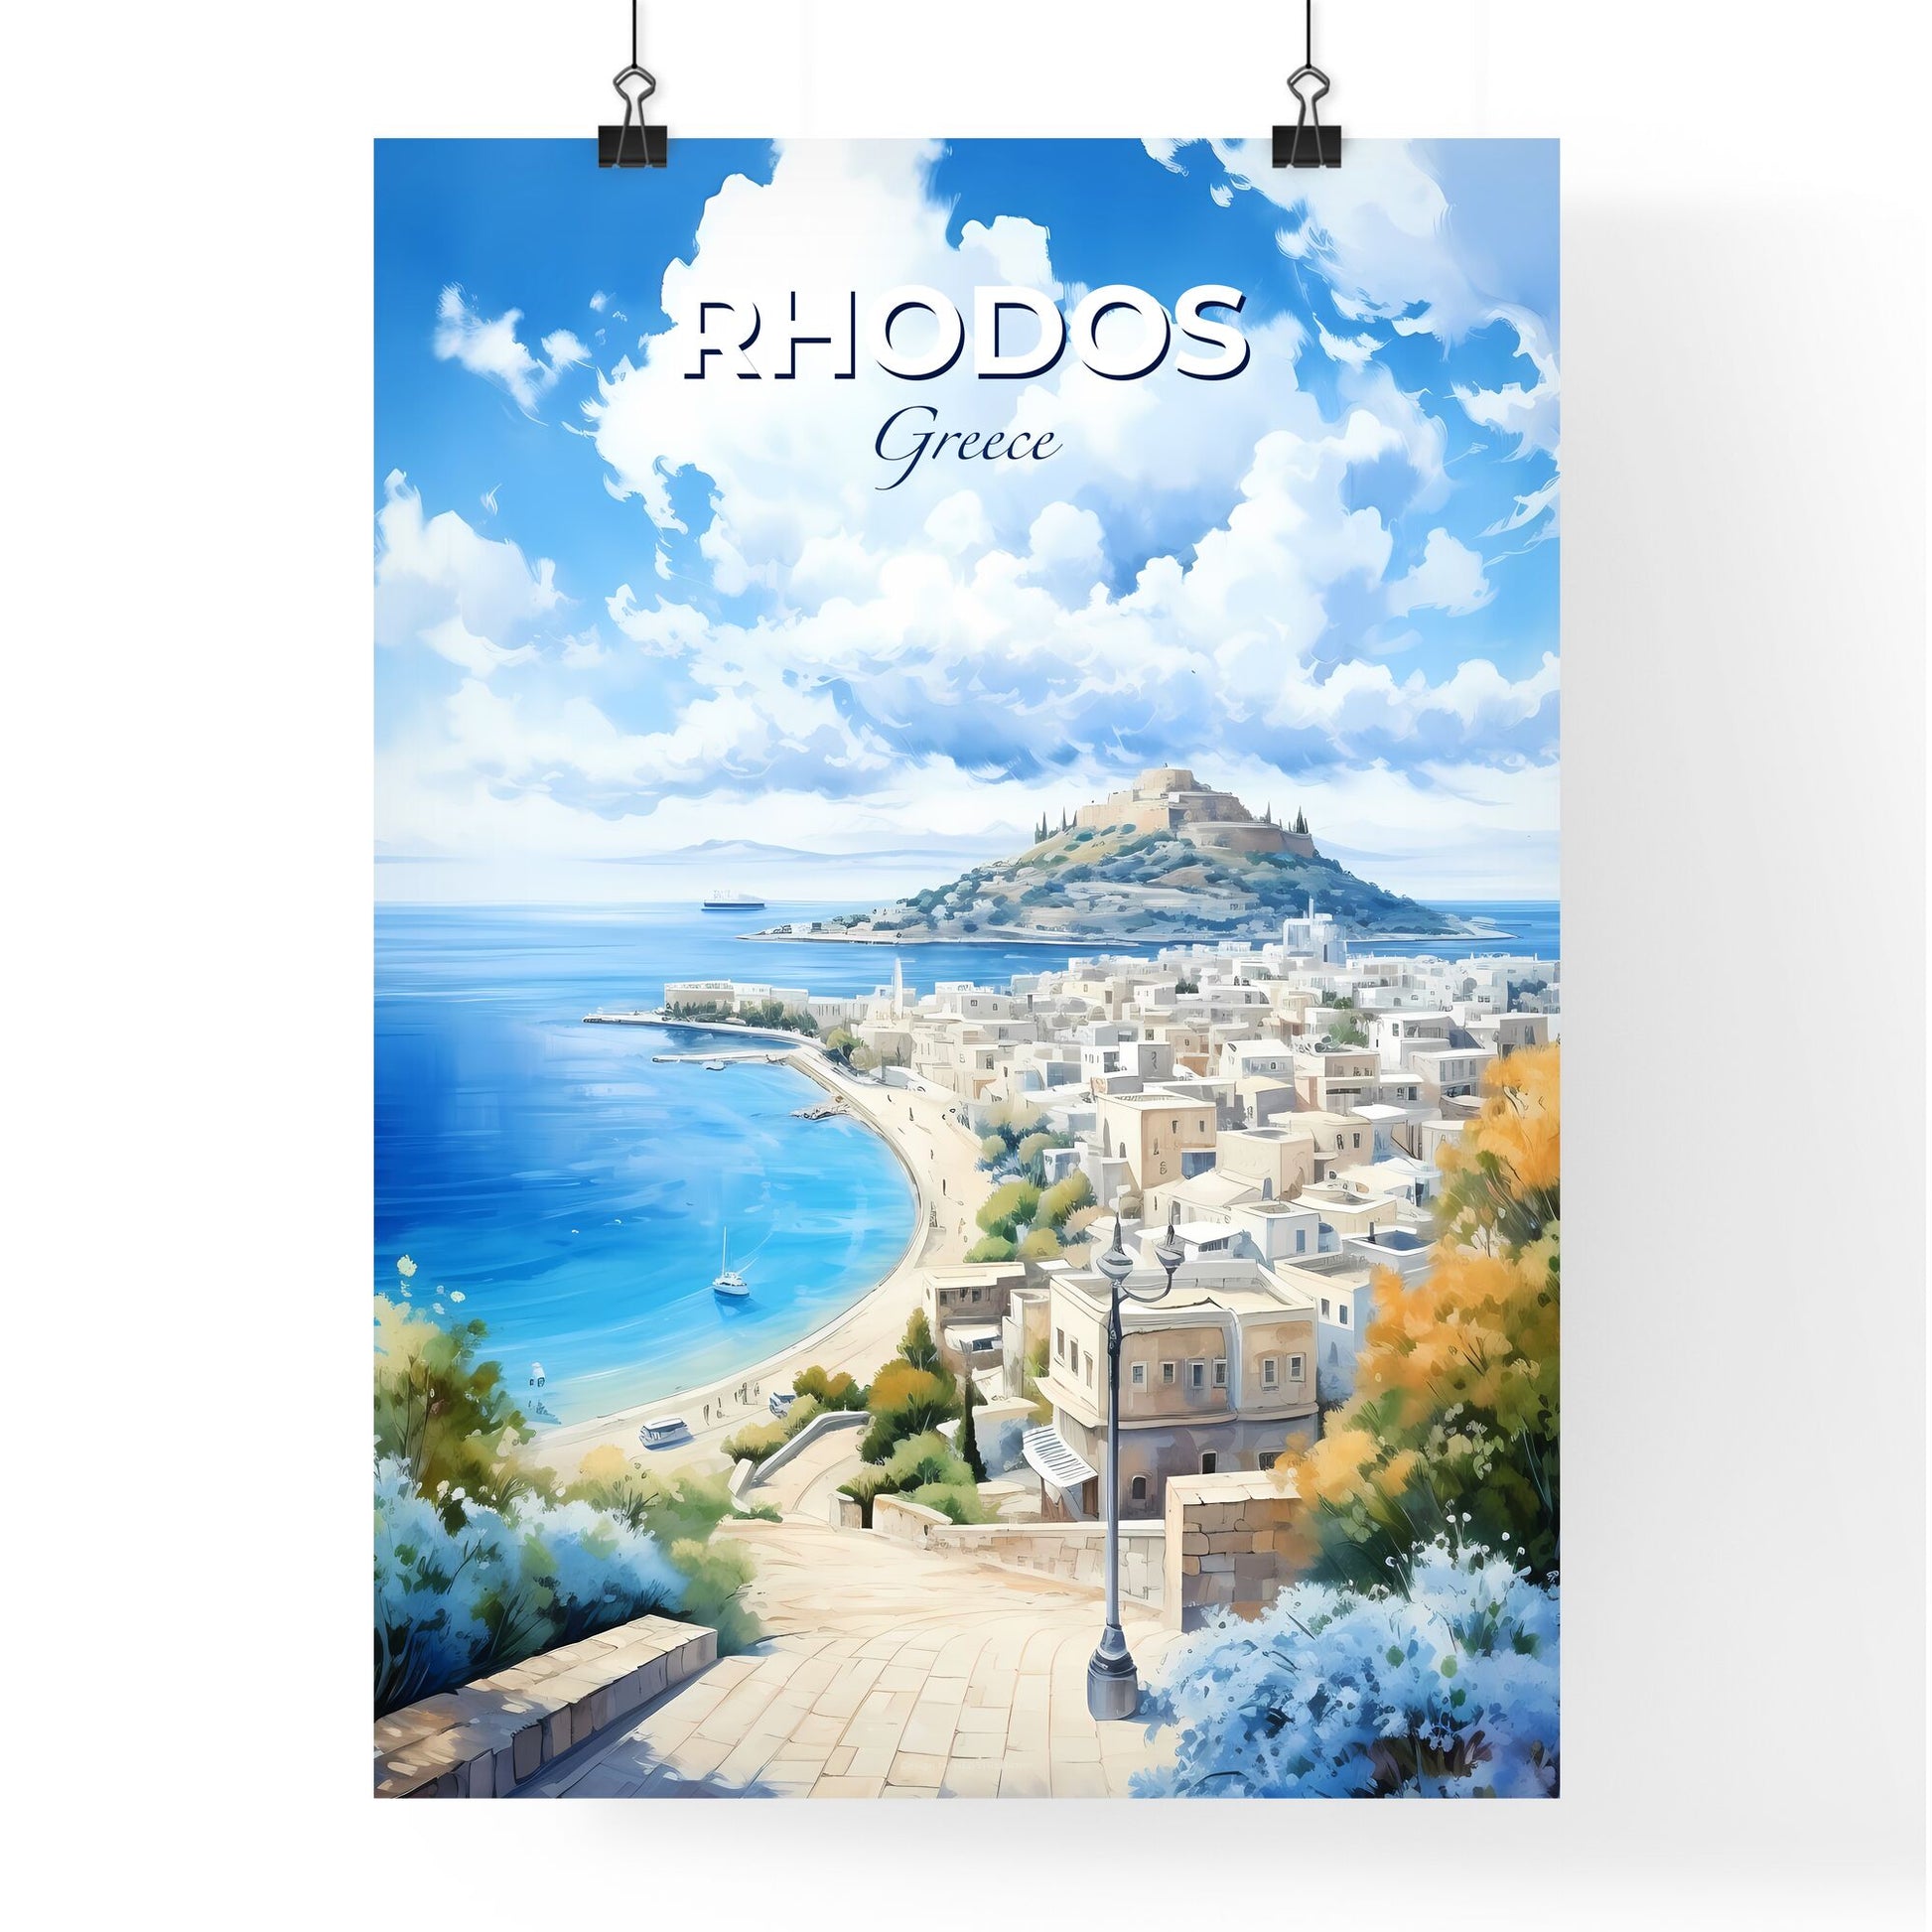 Rhodos Greece Skyline - A Watercolor Painting Of A City And A Beach - Customizable Travel Gift Default Title